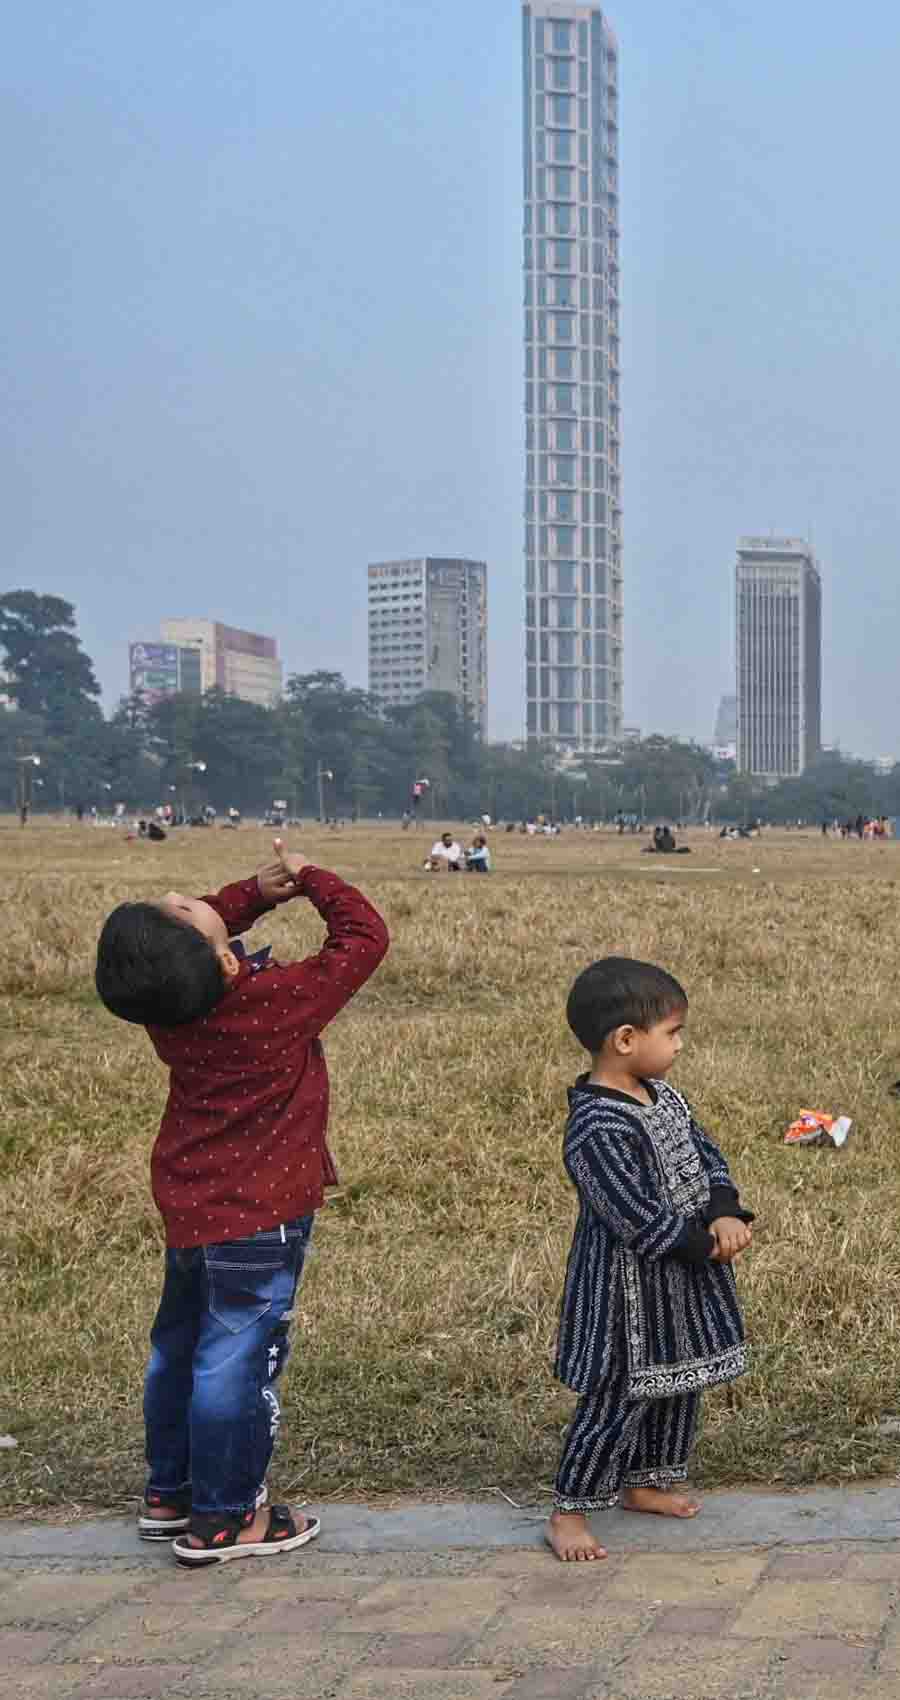 The ‘42’ skyscraper on Jawaharlal Nehru Road seems to amuse a couple of infants on the Maidan on Saturday afternoon